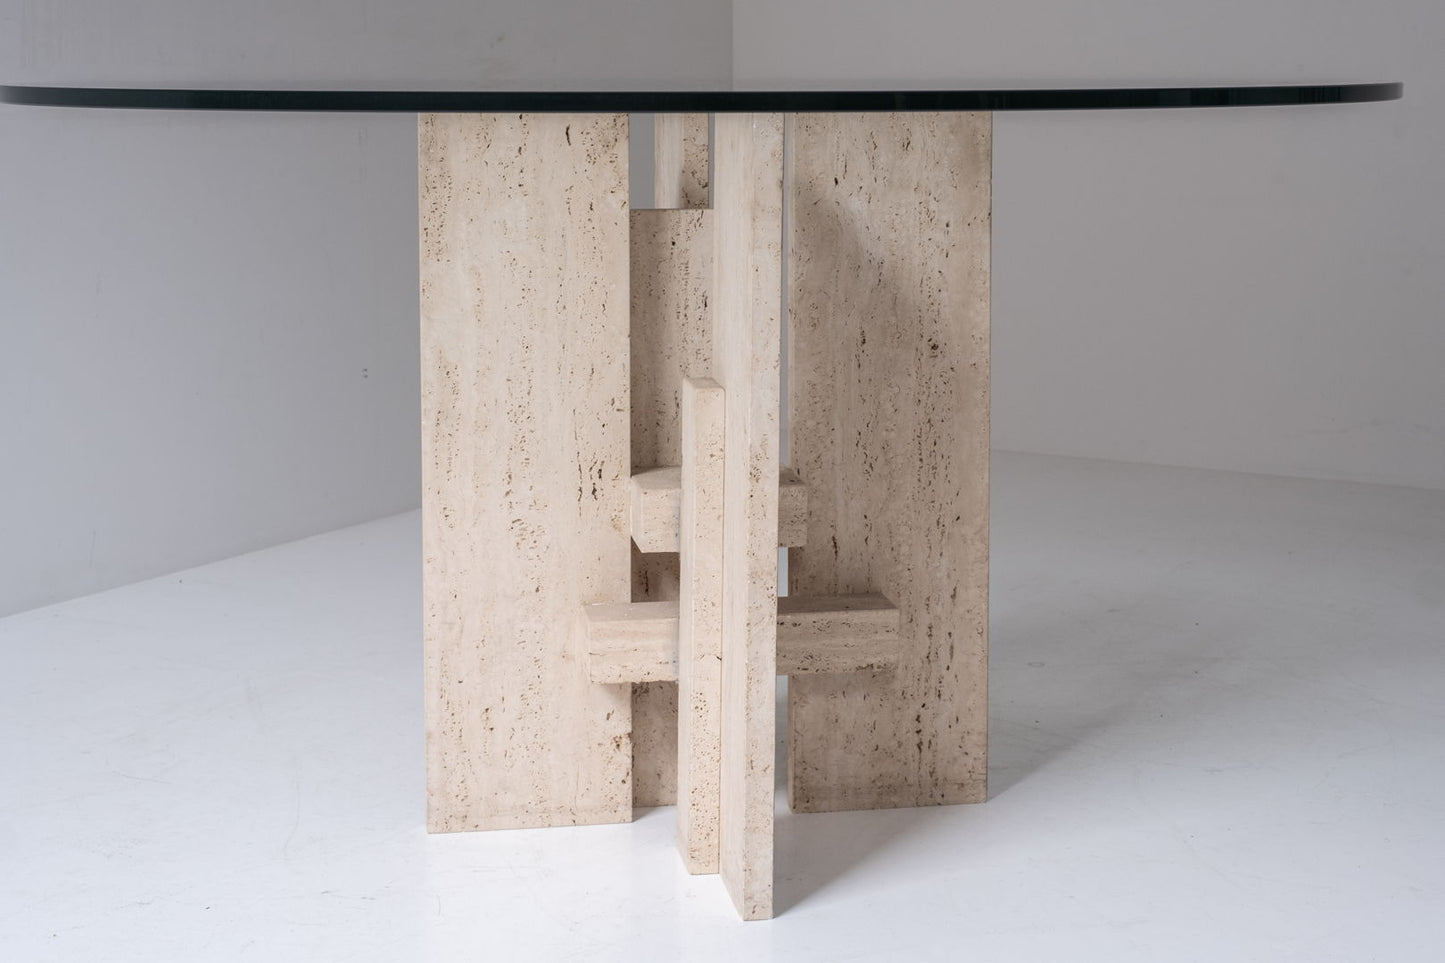 Travertine table with sculptural base designed and manufactured in the 1970s.